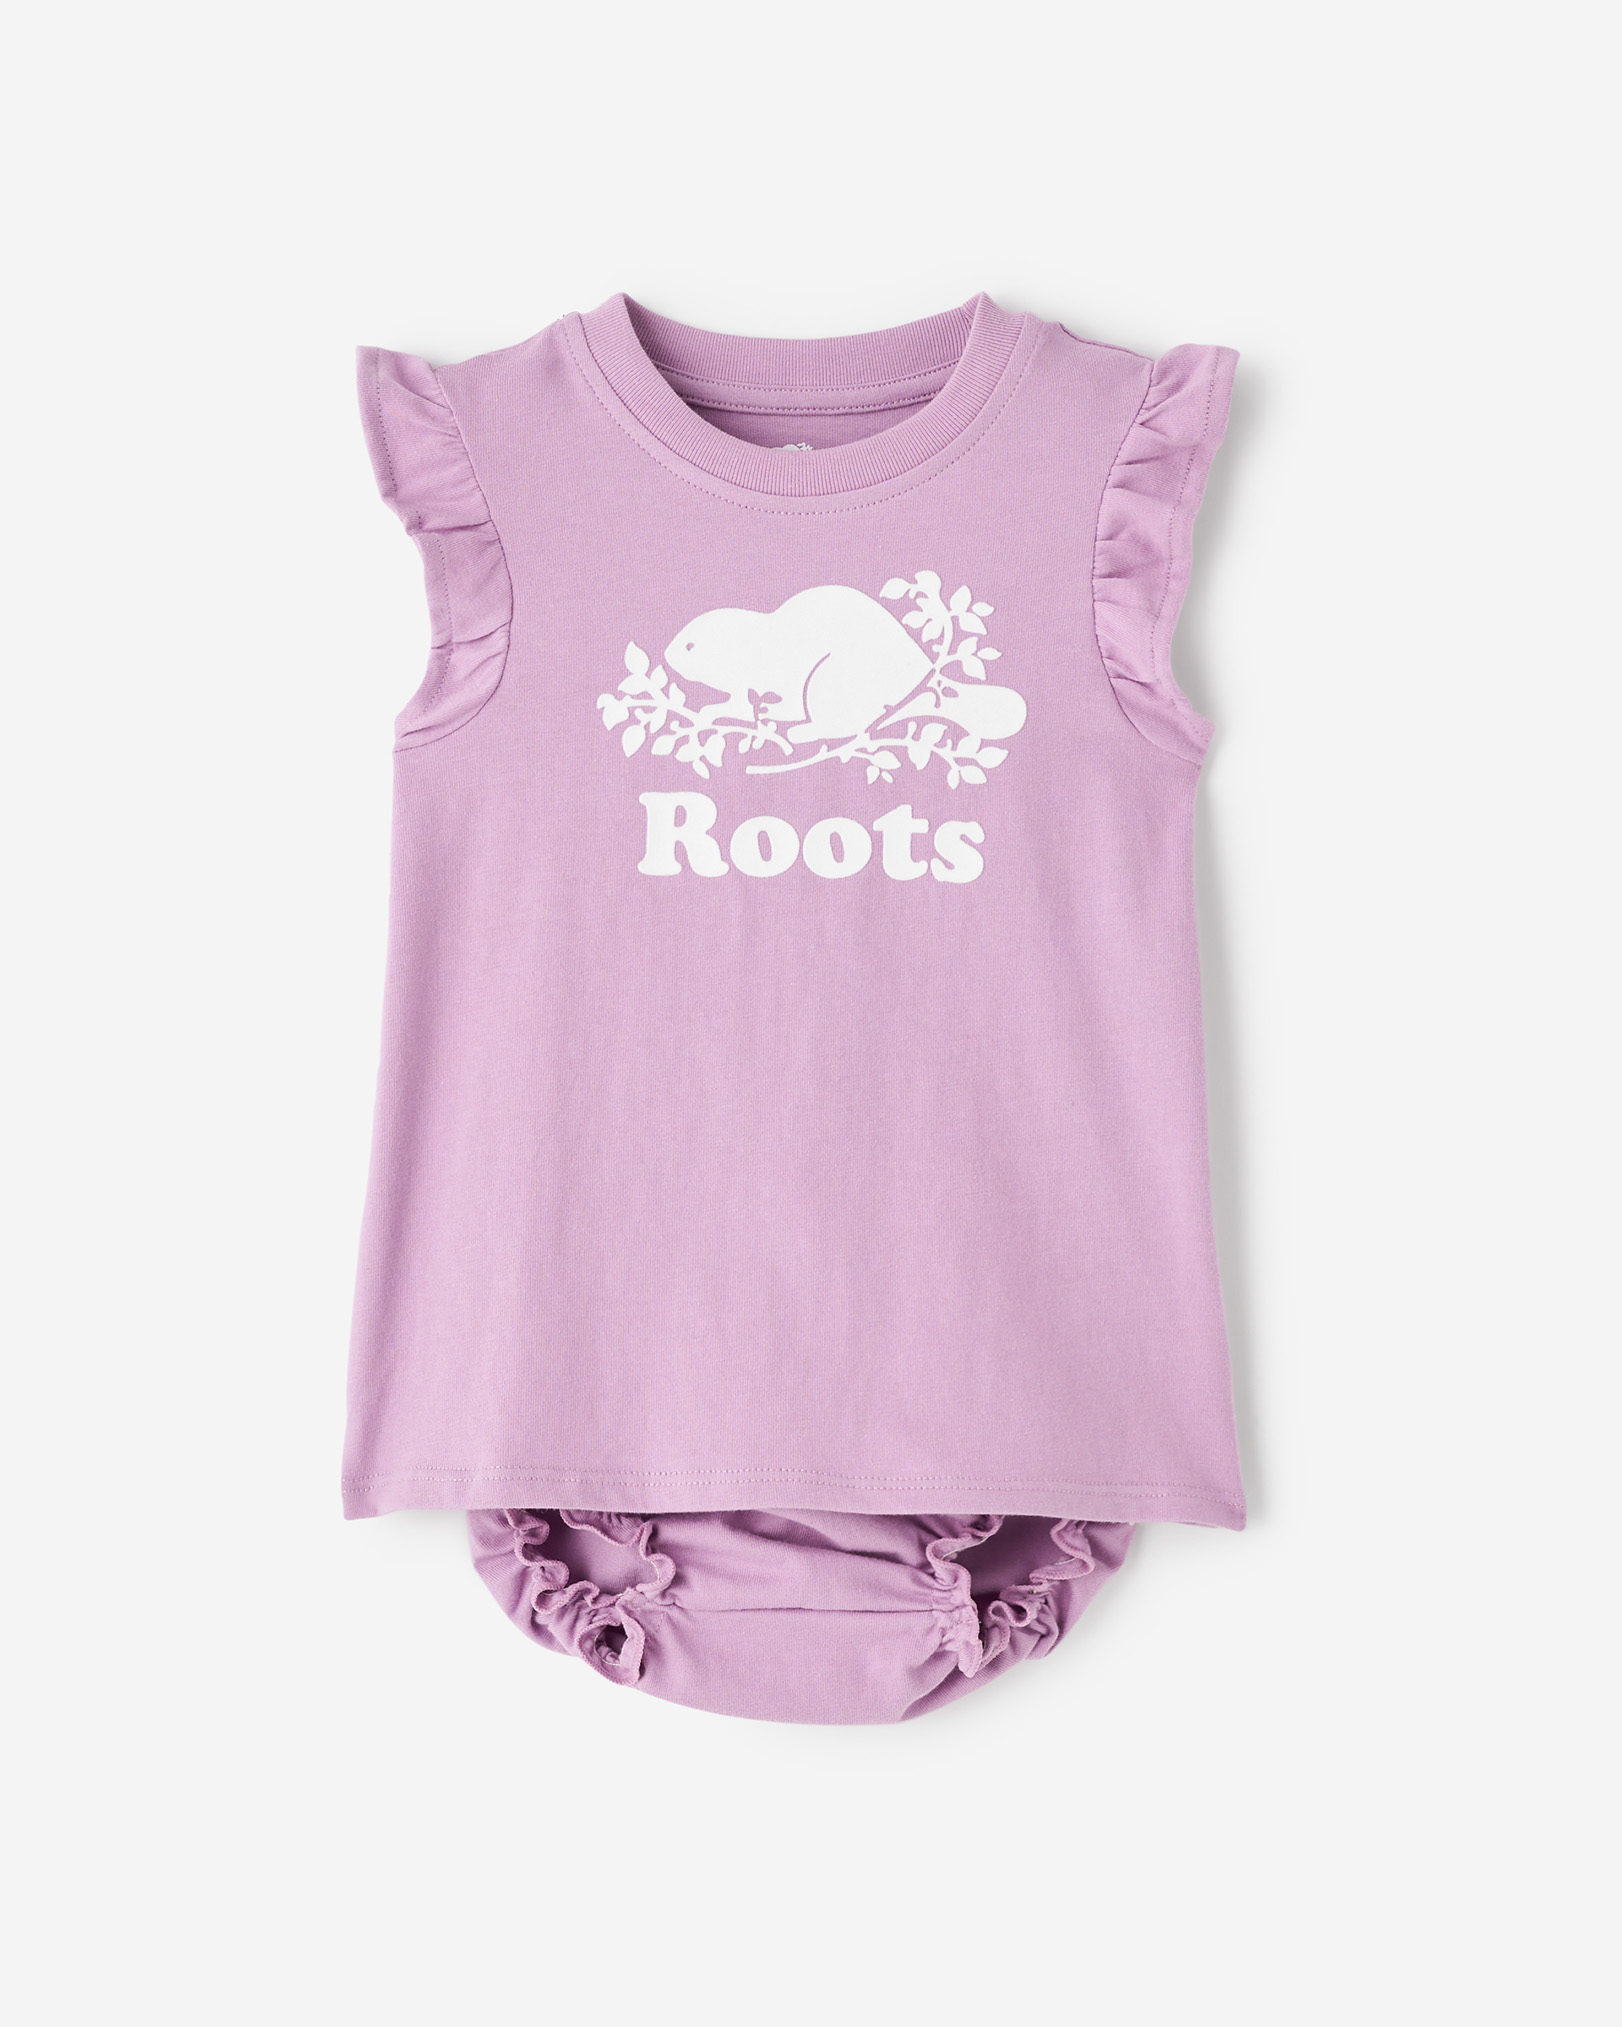 Roots Baby Cooper Dress in Lavender Herb